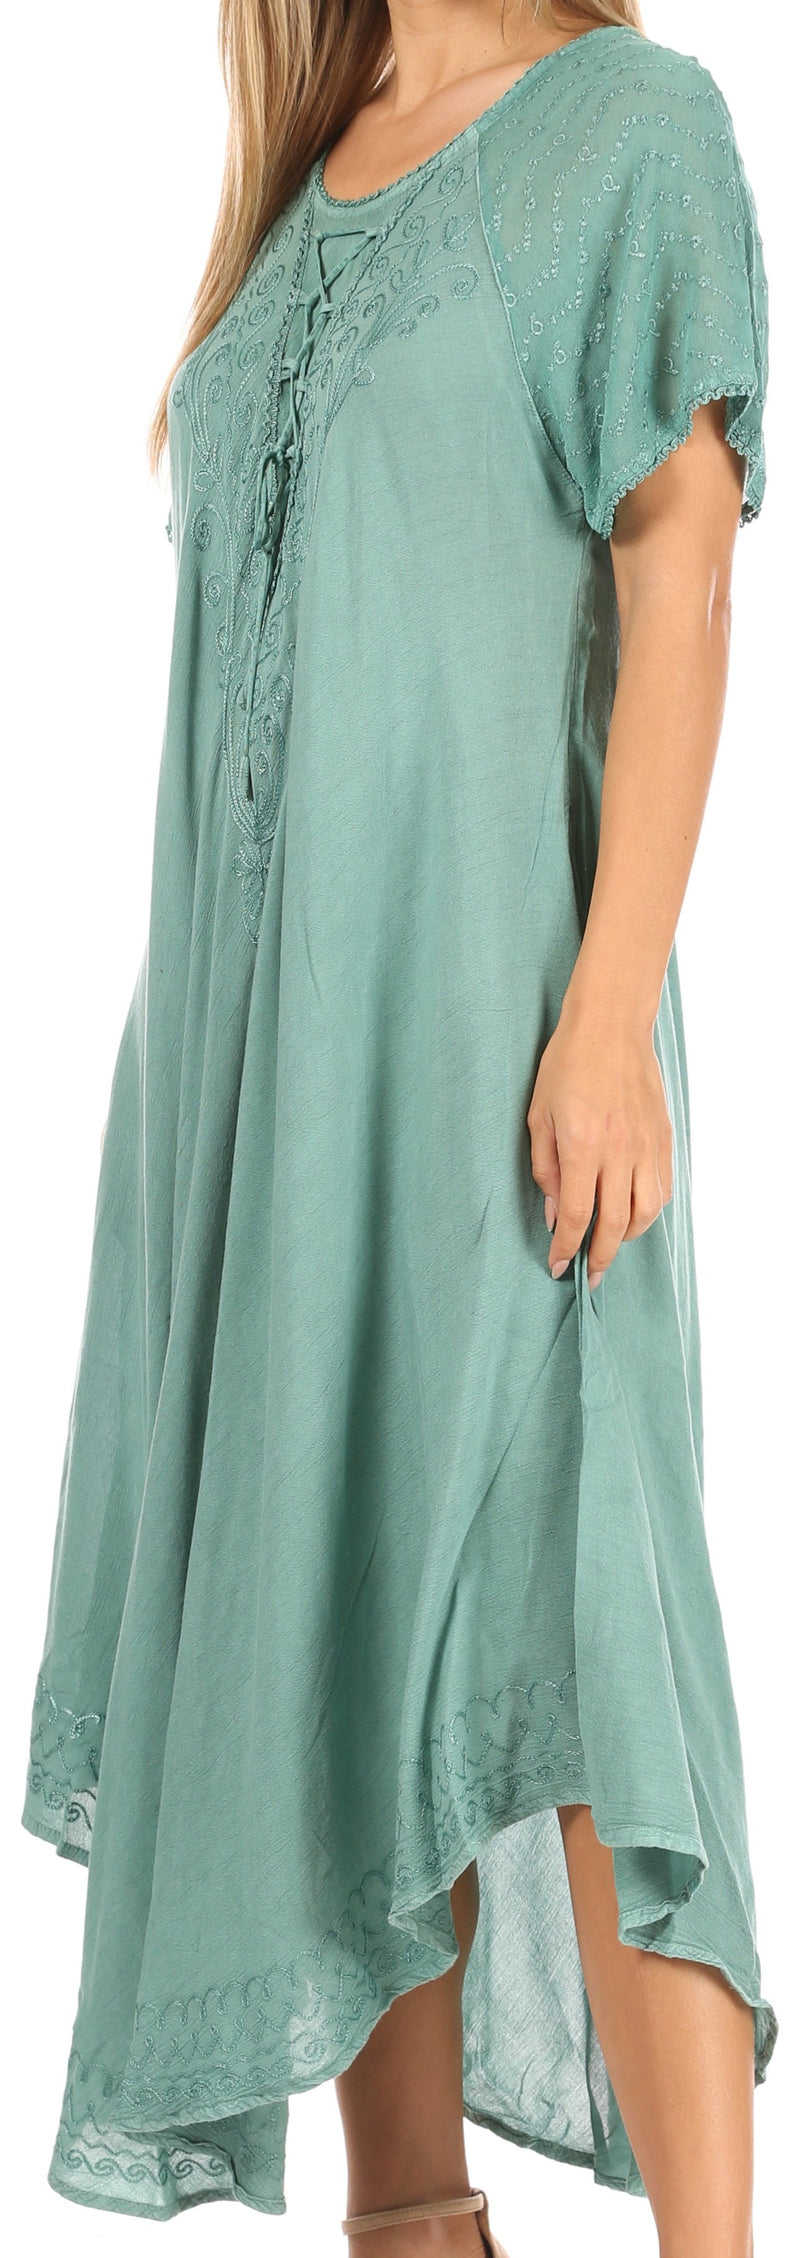 Sakkas Shasta Lace Embroidered Cap Sleeves Long Caftan Dress / Cover Up